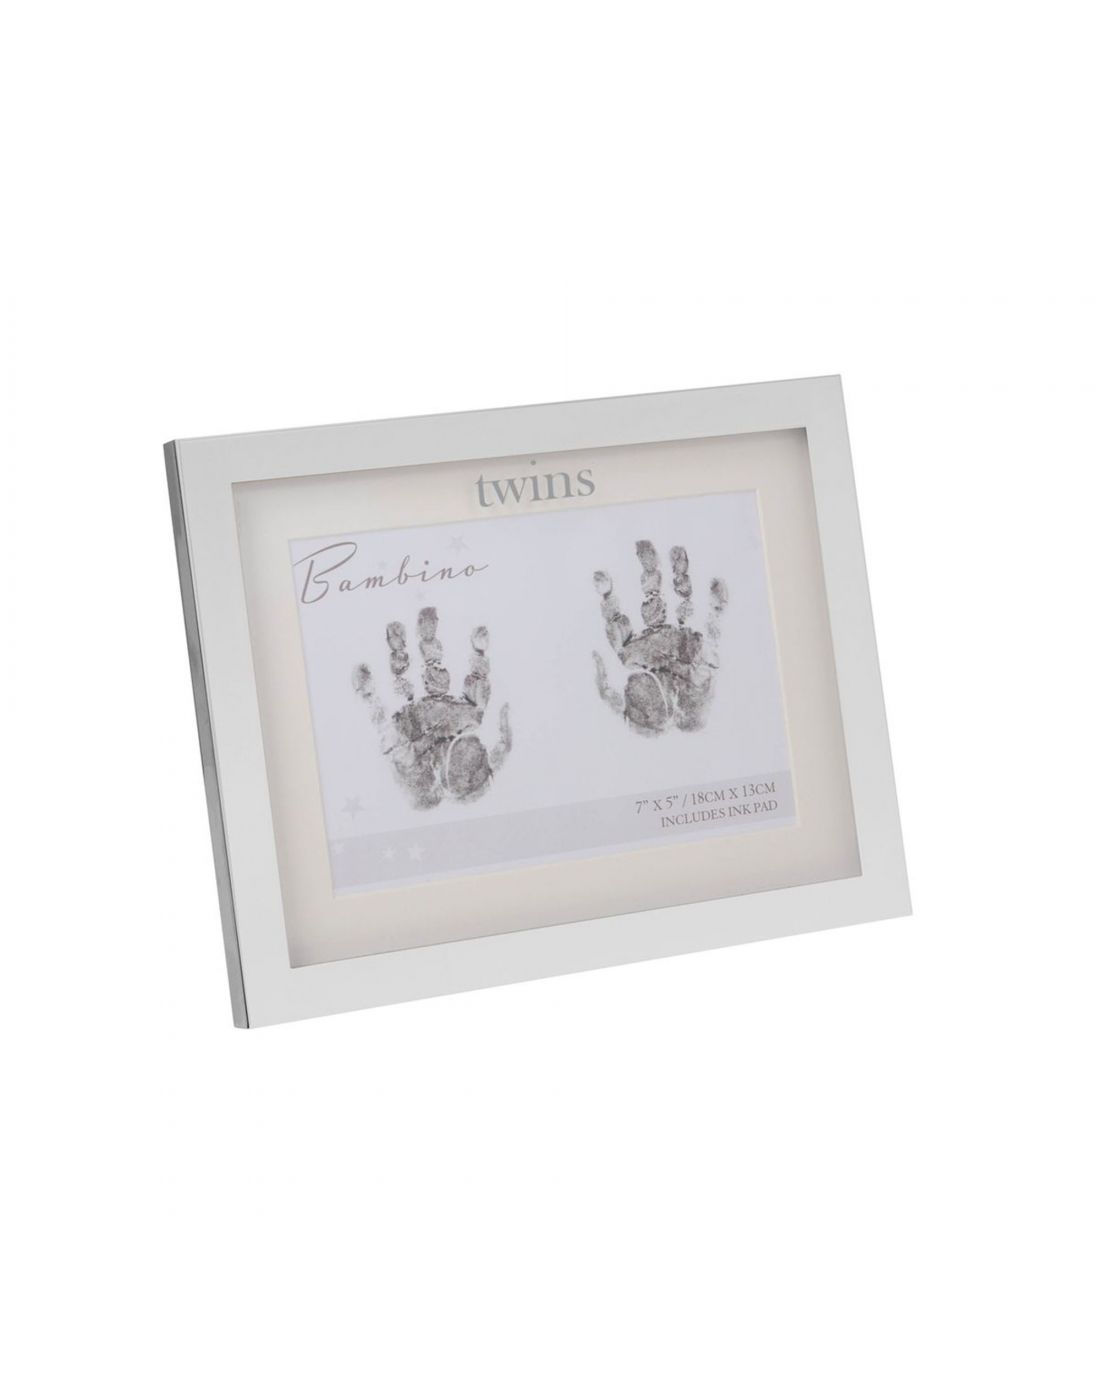 Bambino Silver Plated Handprint Frame with Ink Pad ''Twins''